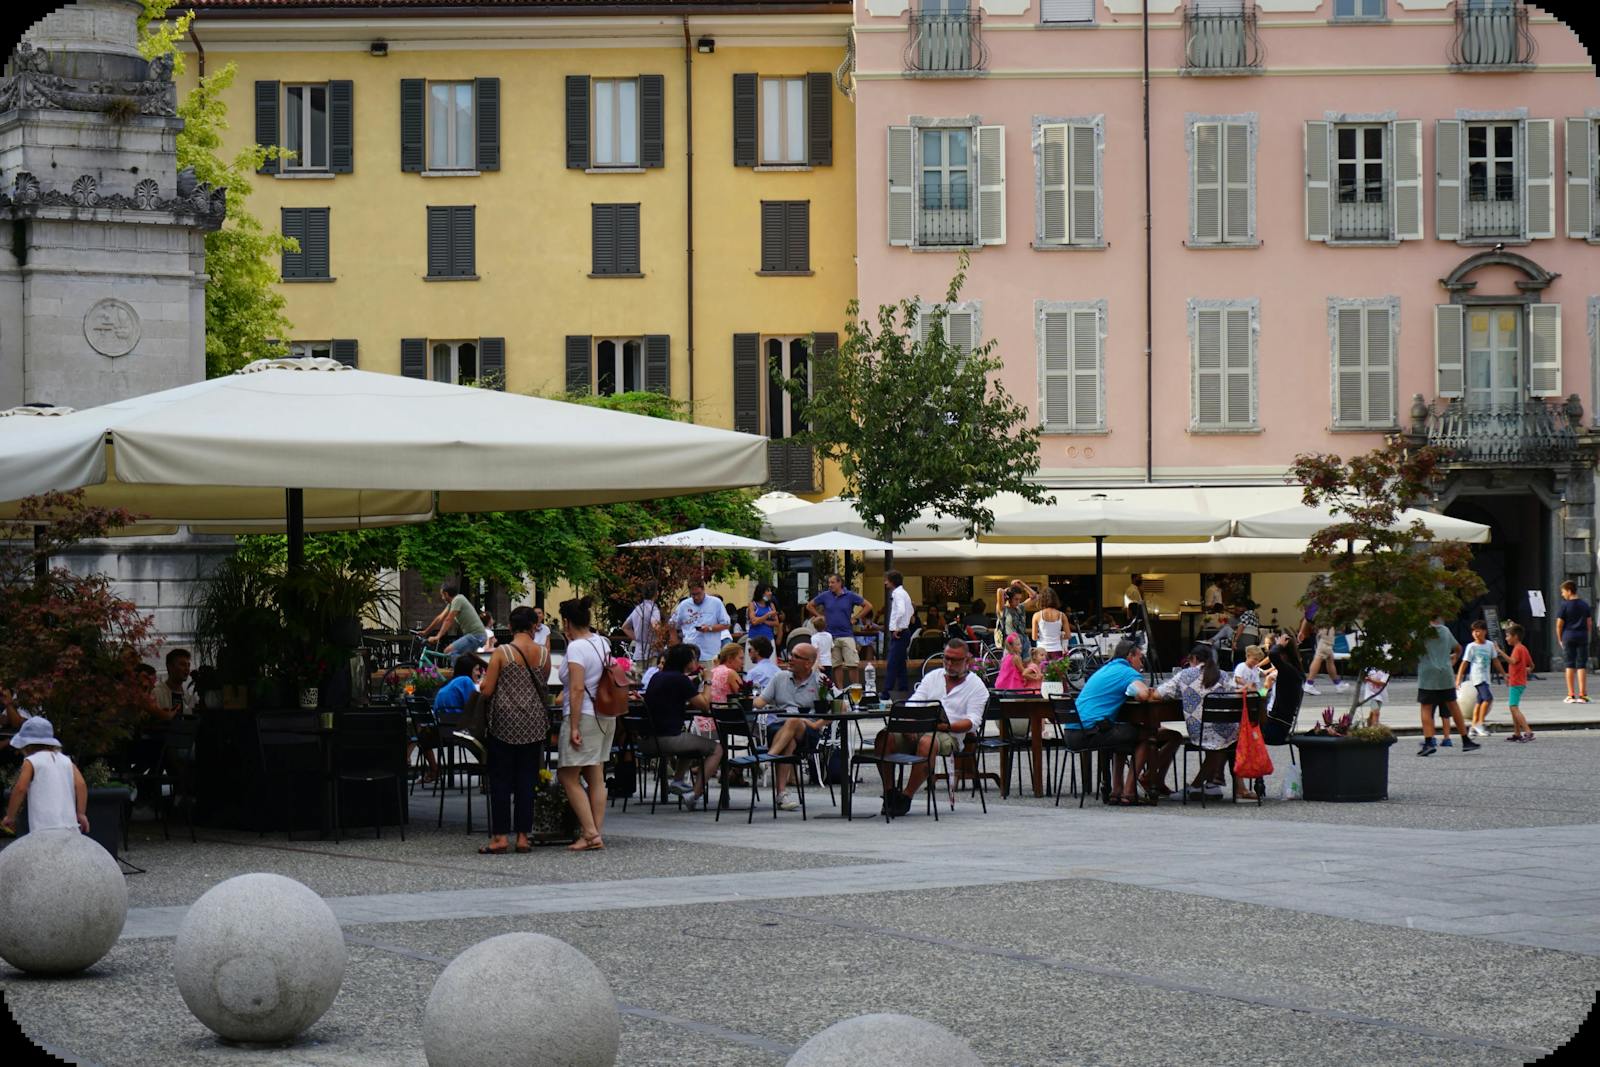 Image of outdoor dining